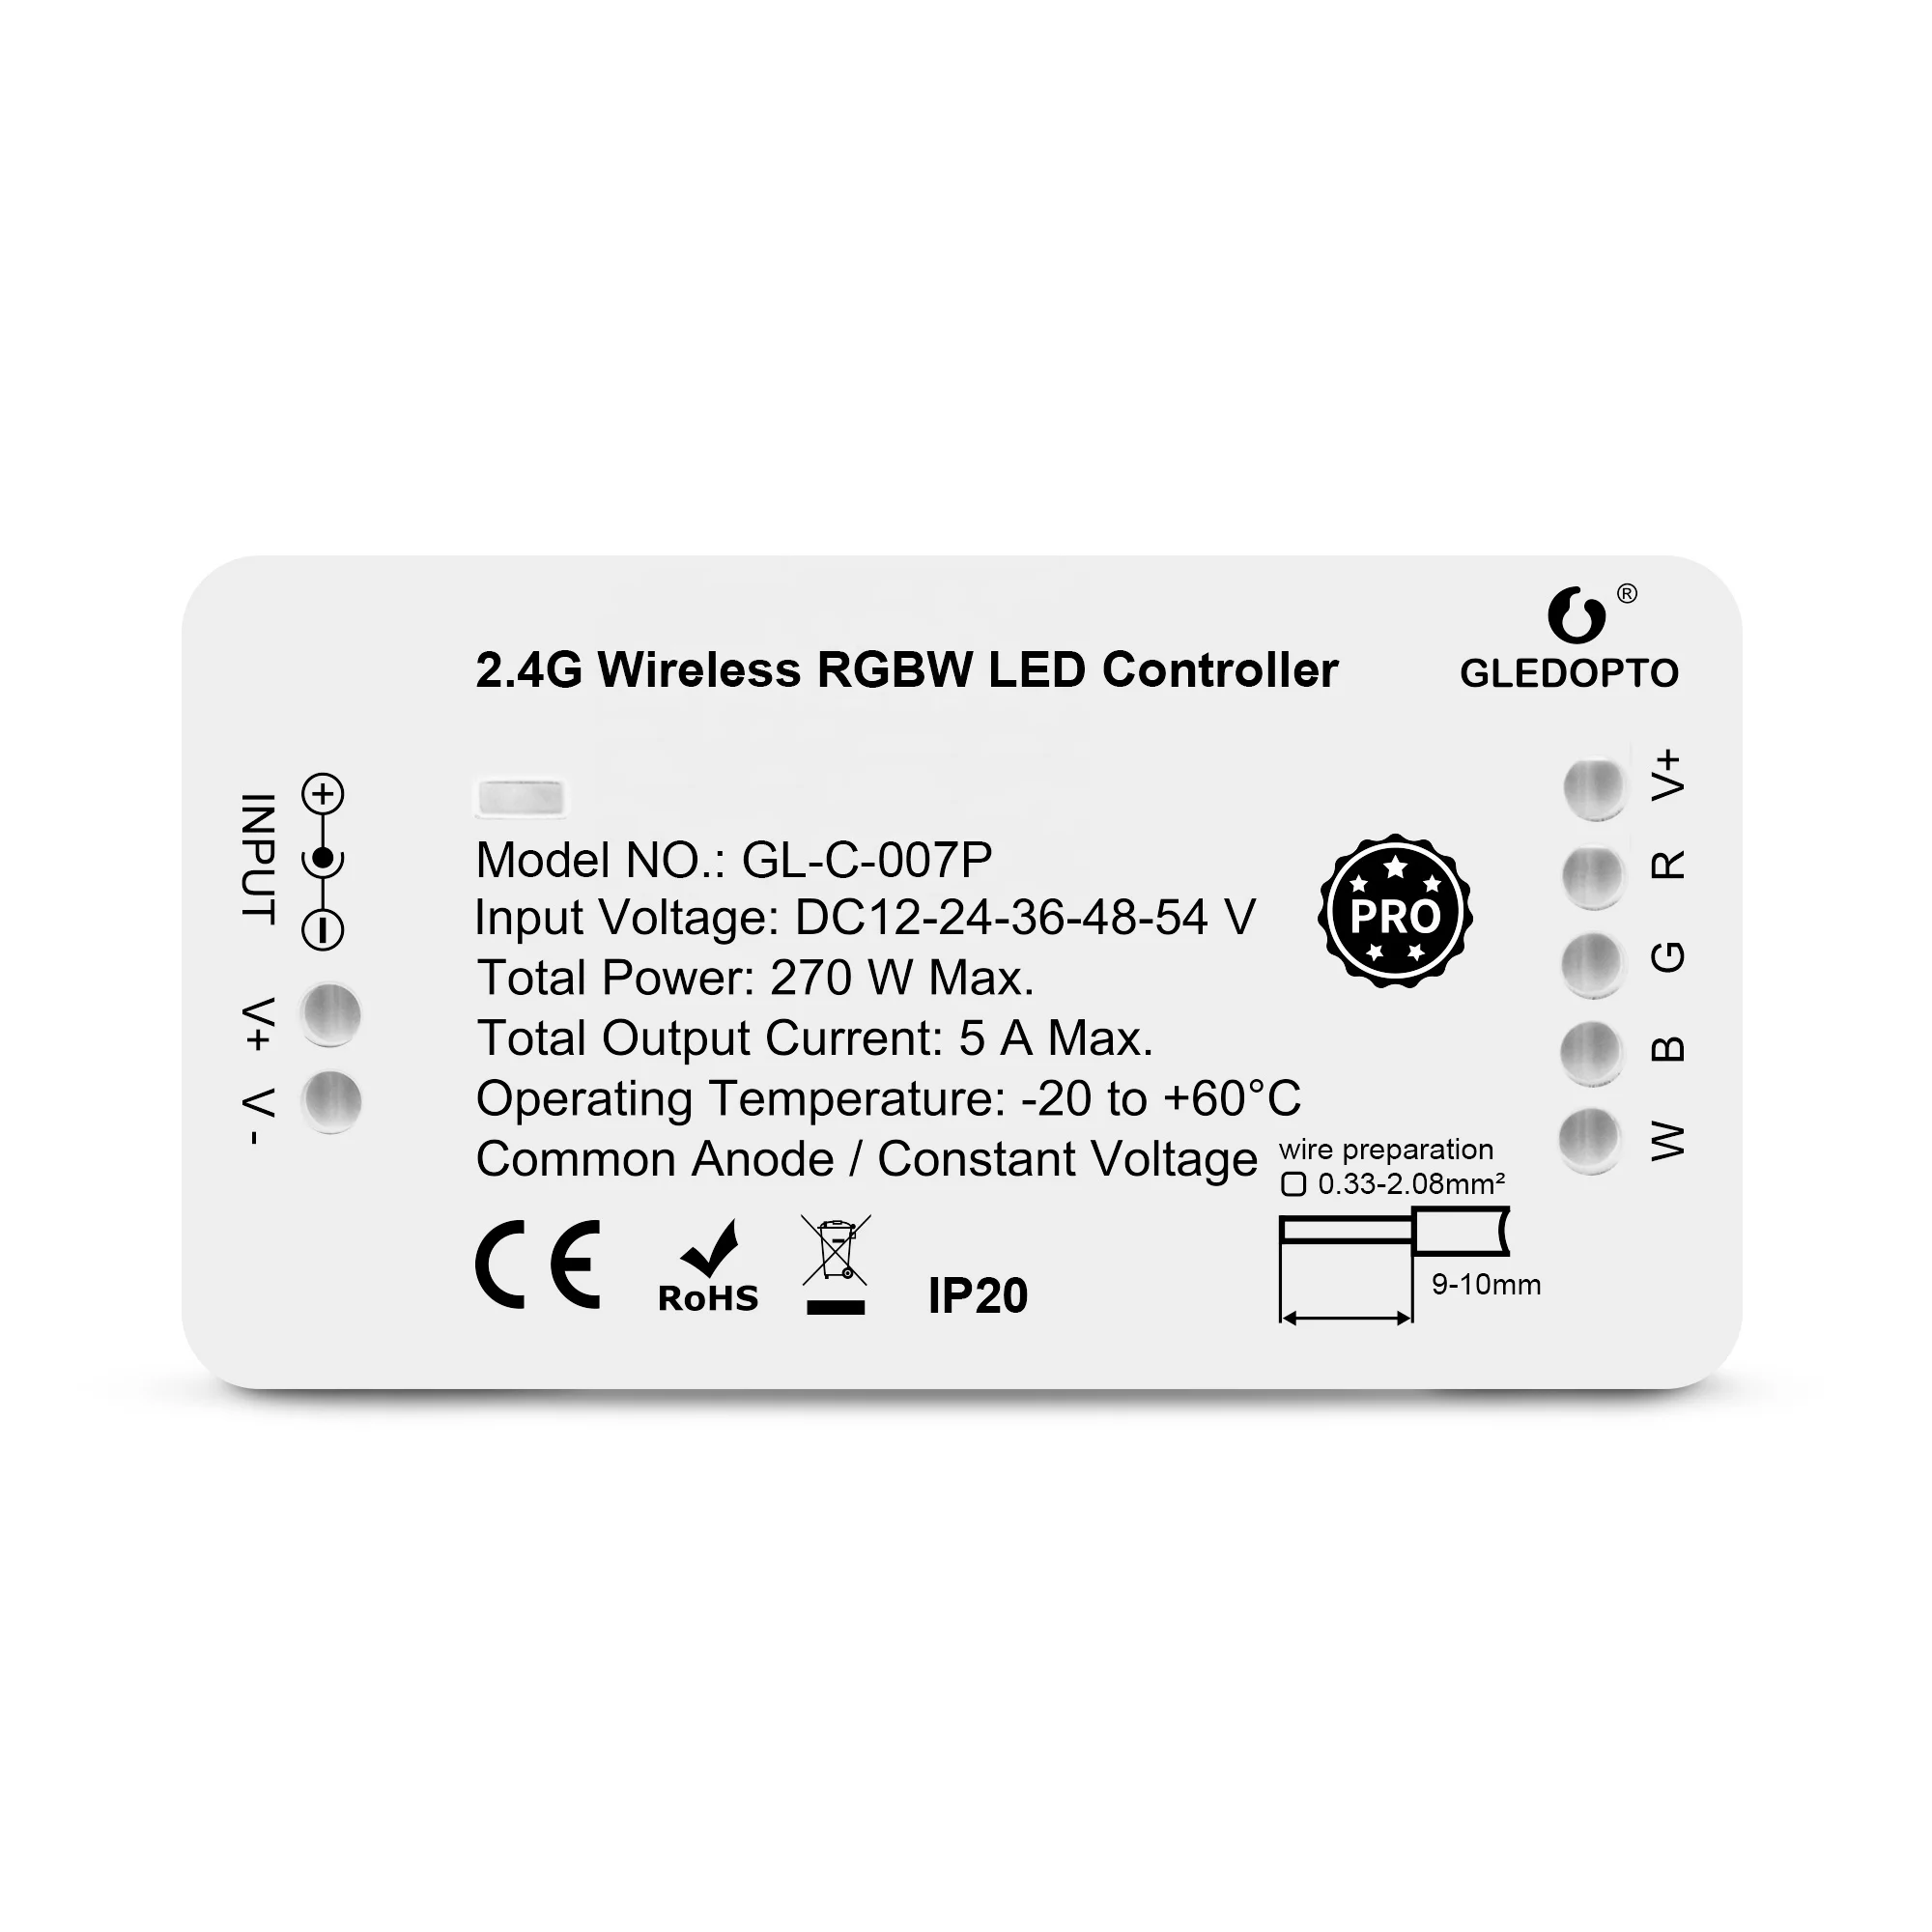 Vervolg visie Grens Gl-c-007p Gledopto Zigbee Led Controller For Rgbw Led Strip Light App And  Voice Remote Control Zigbee Led Driver 12-54v 4channel - Buy Gledopto  Zigbee Led Controller,Zigbee Led Controller For Rgbw Led Strip